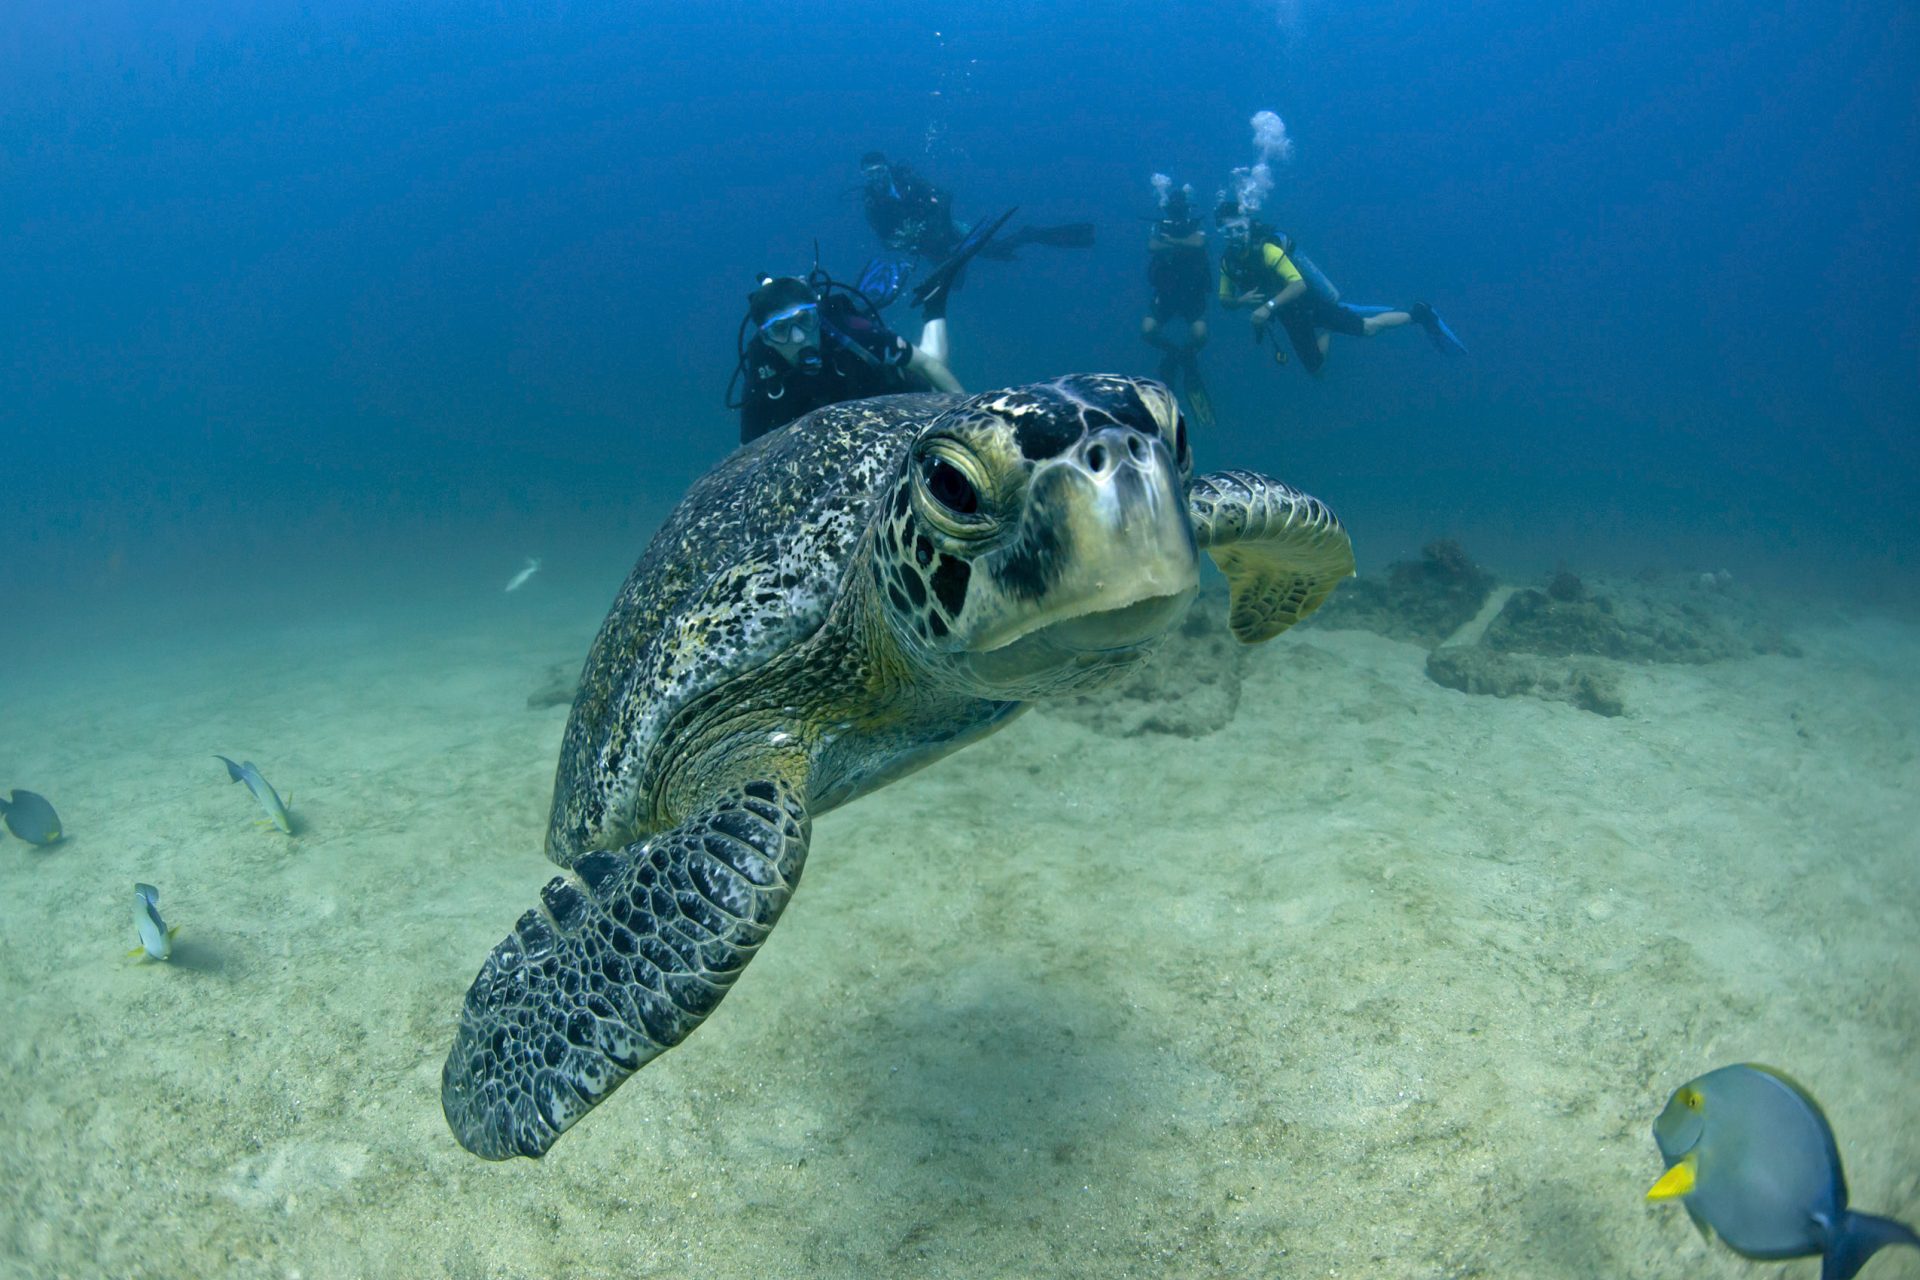 Divers enjoy the presence of one of the green sea turtles that visit the area to nest. Once degraded by overfishing, Cabo Pulmo has become the world's most robust marine reserve. The Mexican government declared the area a National Park in 1995, and the local community has been enforcing the park’s regulations that prohibit commercial extractive activities as well as any activity that may alter natural conditions. After 16 years, local people enjoy better life conditions, and the abundance of large top predator fish has also increased. The park is now home to high concentration of fish and is a refuge for migratory species like whale sharks, manta rays, humpback whales, and five of the world’s seven endangered species of sea turtle. Additionally, sightings of black tip reef sharks, tiger sharks, and bull sharks inside the Park have become common. With the world’s oceans crisis, Cabo Pulmo is a refreshing success story of local conservation; more importantly, it is an example that supports the creation of marine reserves as a means to increase economic perspectives for coastal communities worldwide.